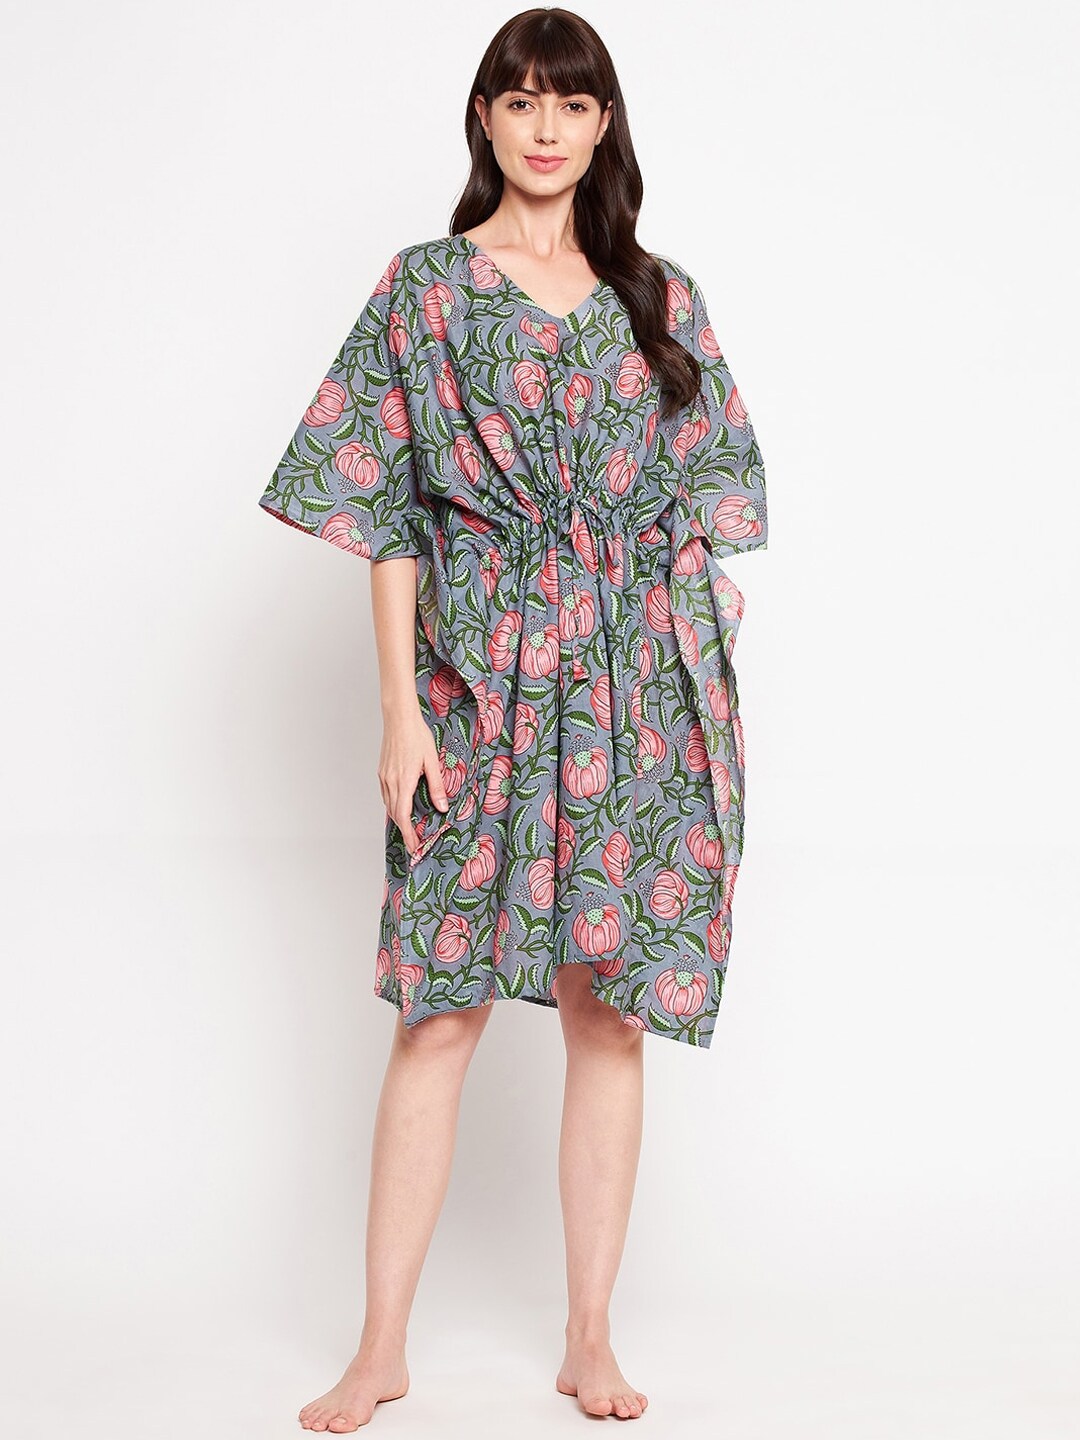 SECRETS BY ZEROKAATA Women Grey & Pink Printed Pure Cotton Kaftan Cover-Up Dress Price in India